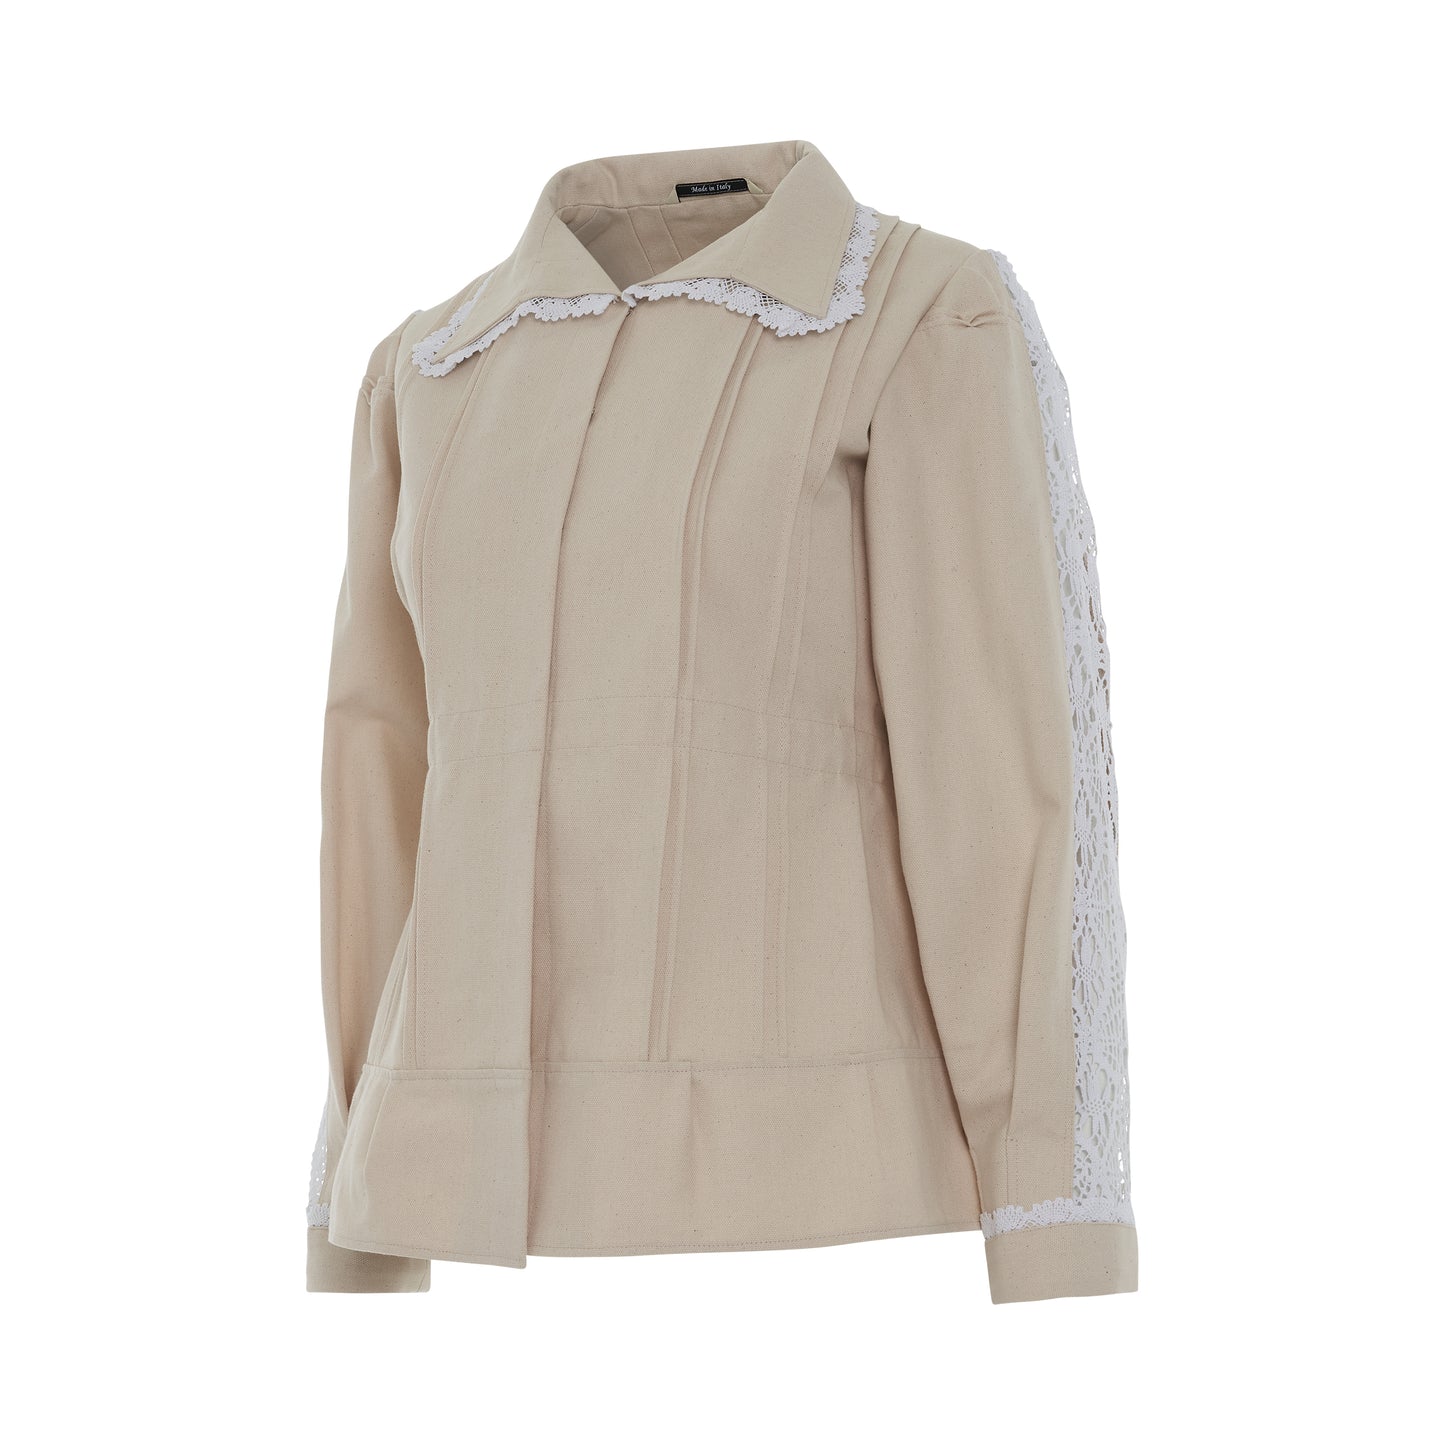 Lace Trimmed Pleated Cotton Jacket in Ecru